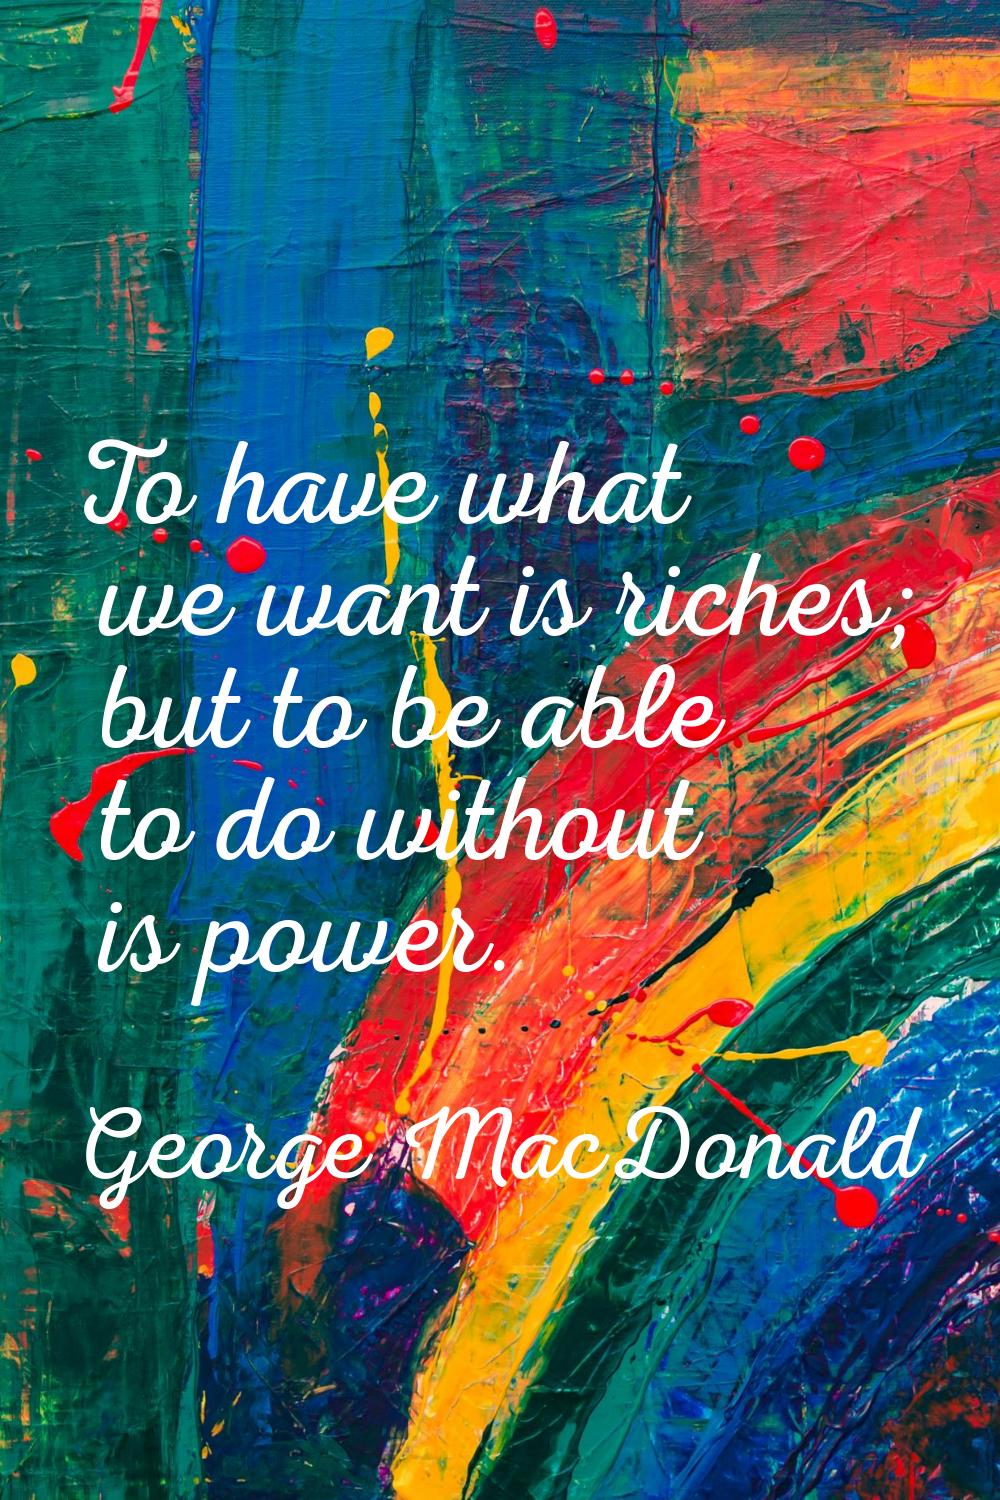 To have what we want is riches; but to be able to do without is power.